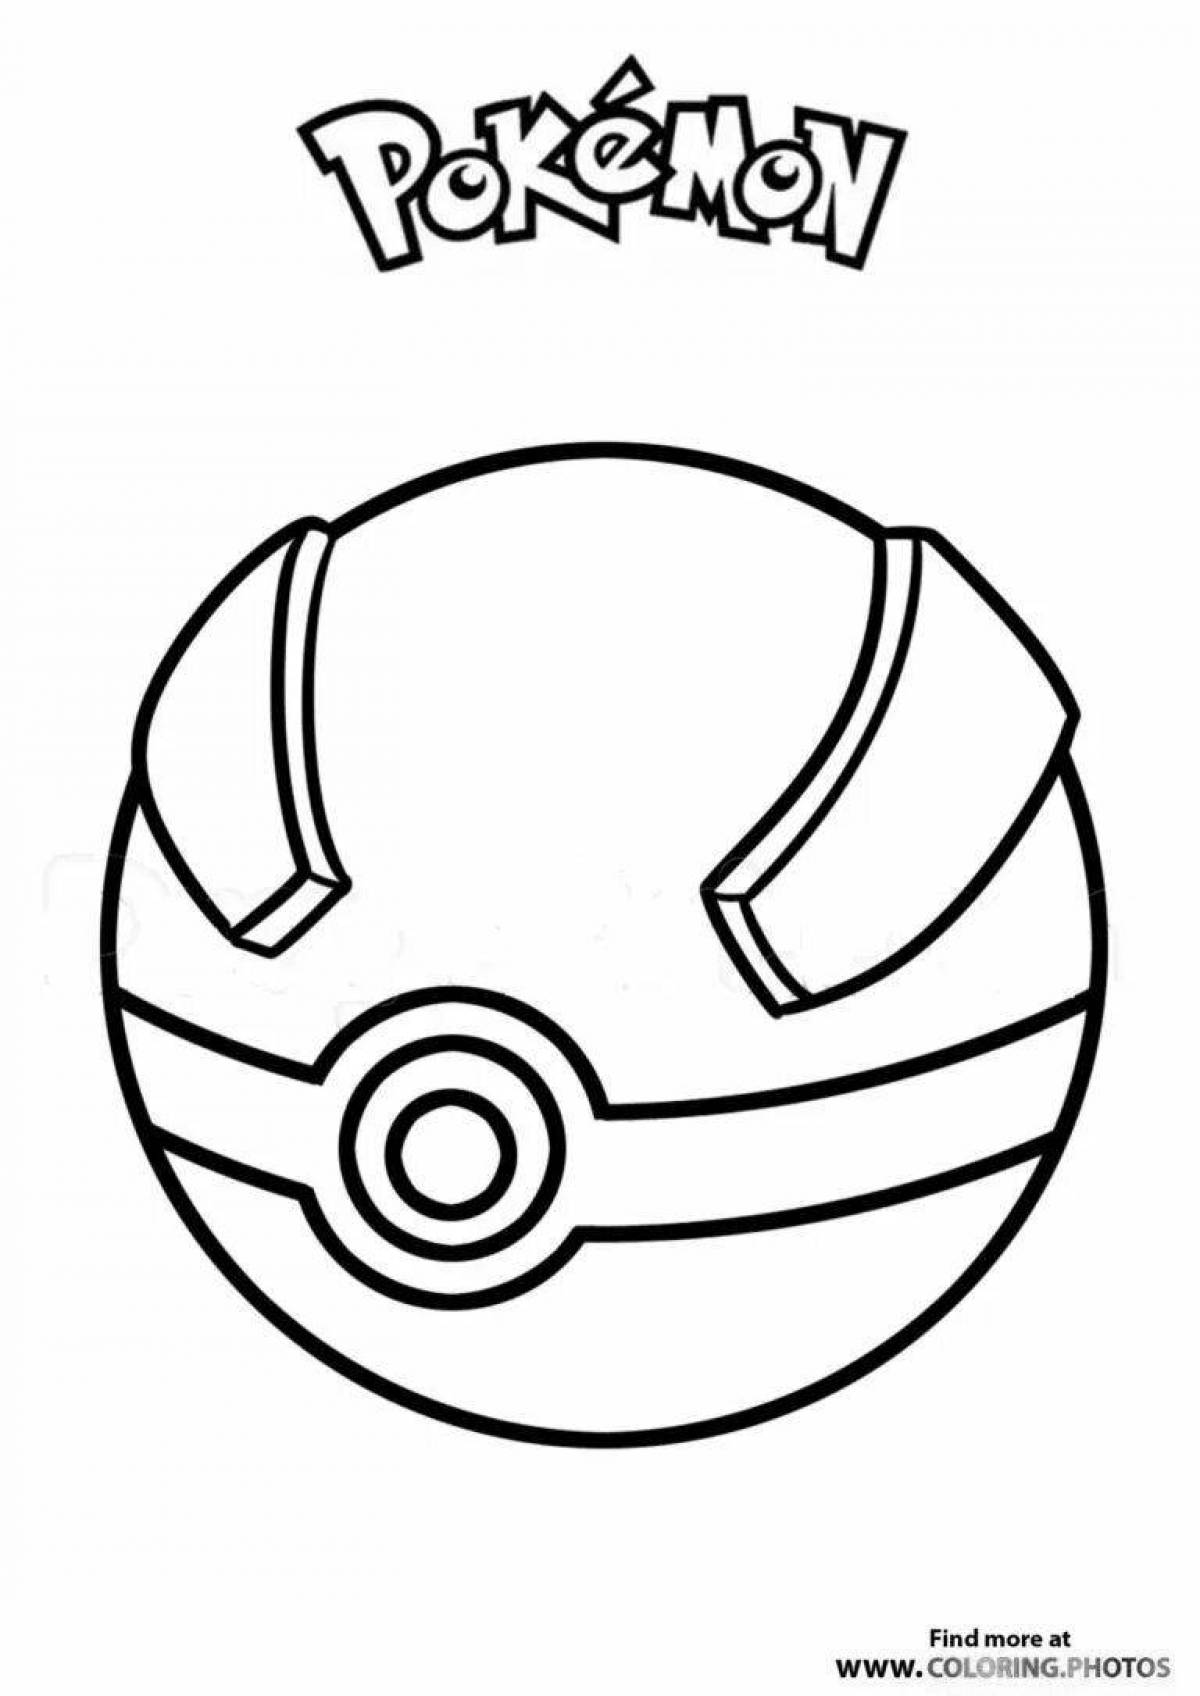 Attractive pikachu and pokeball coloring book